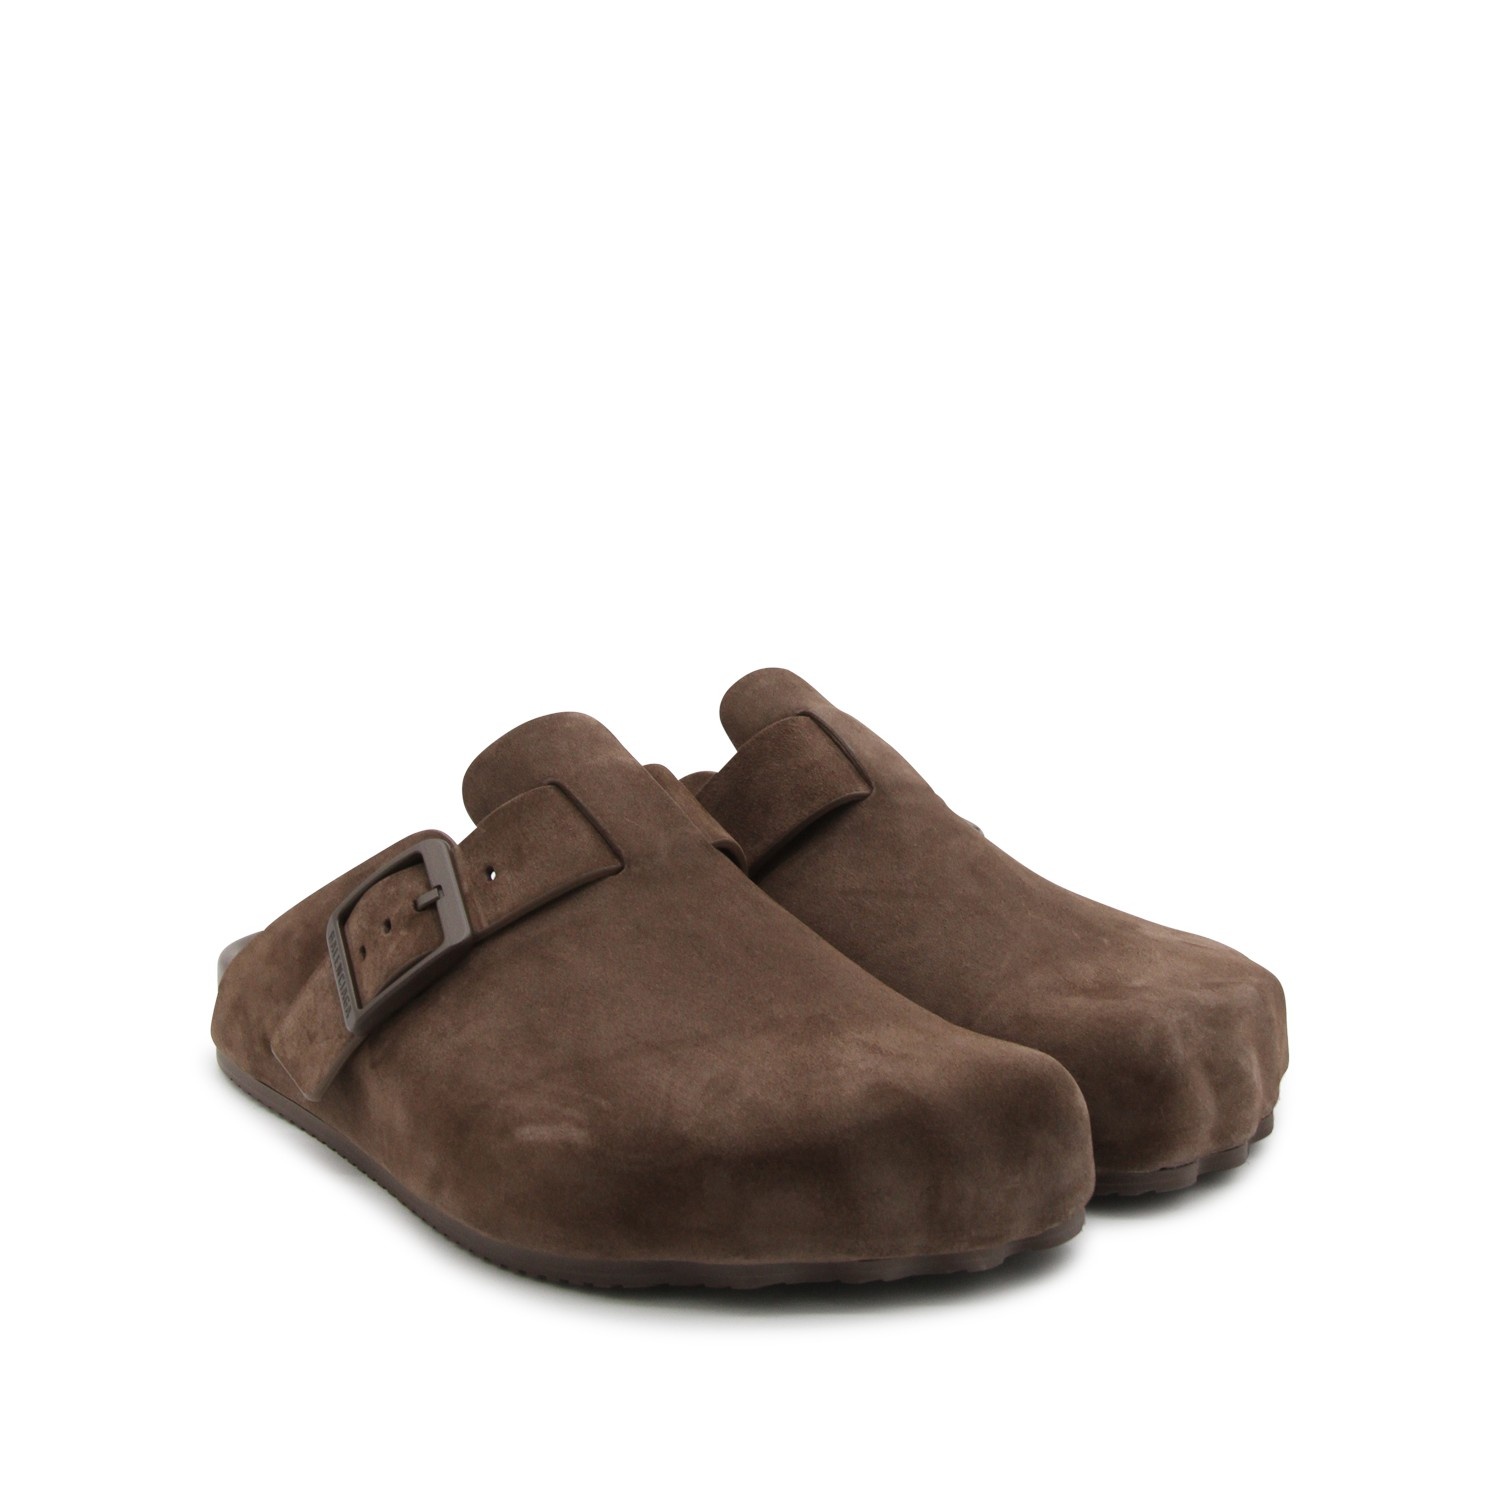 BROWN SUEDE SUNDAY FLATS - 2